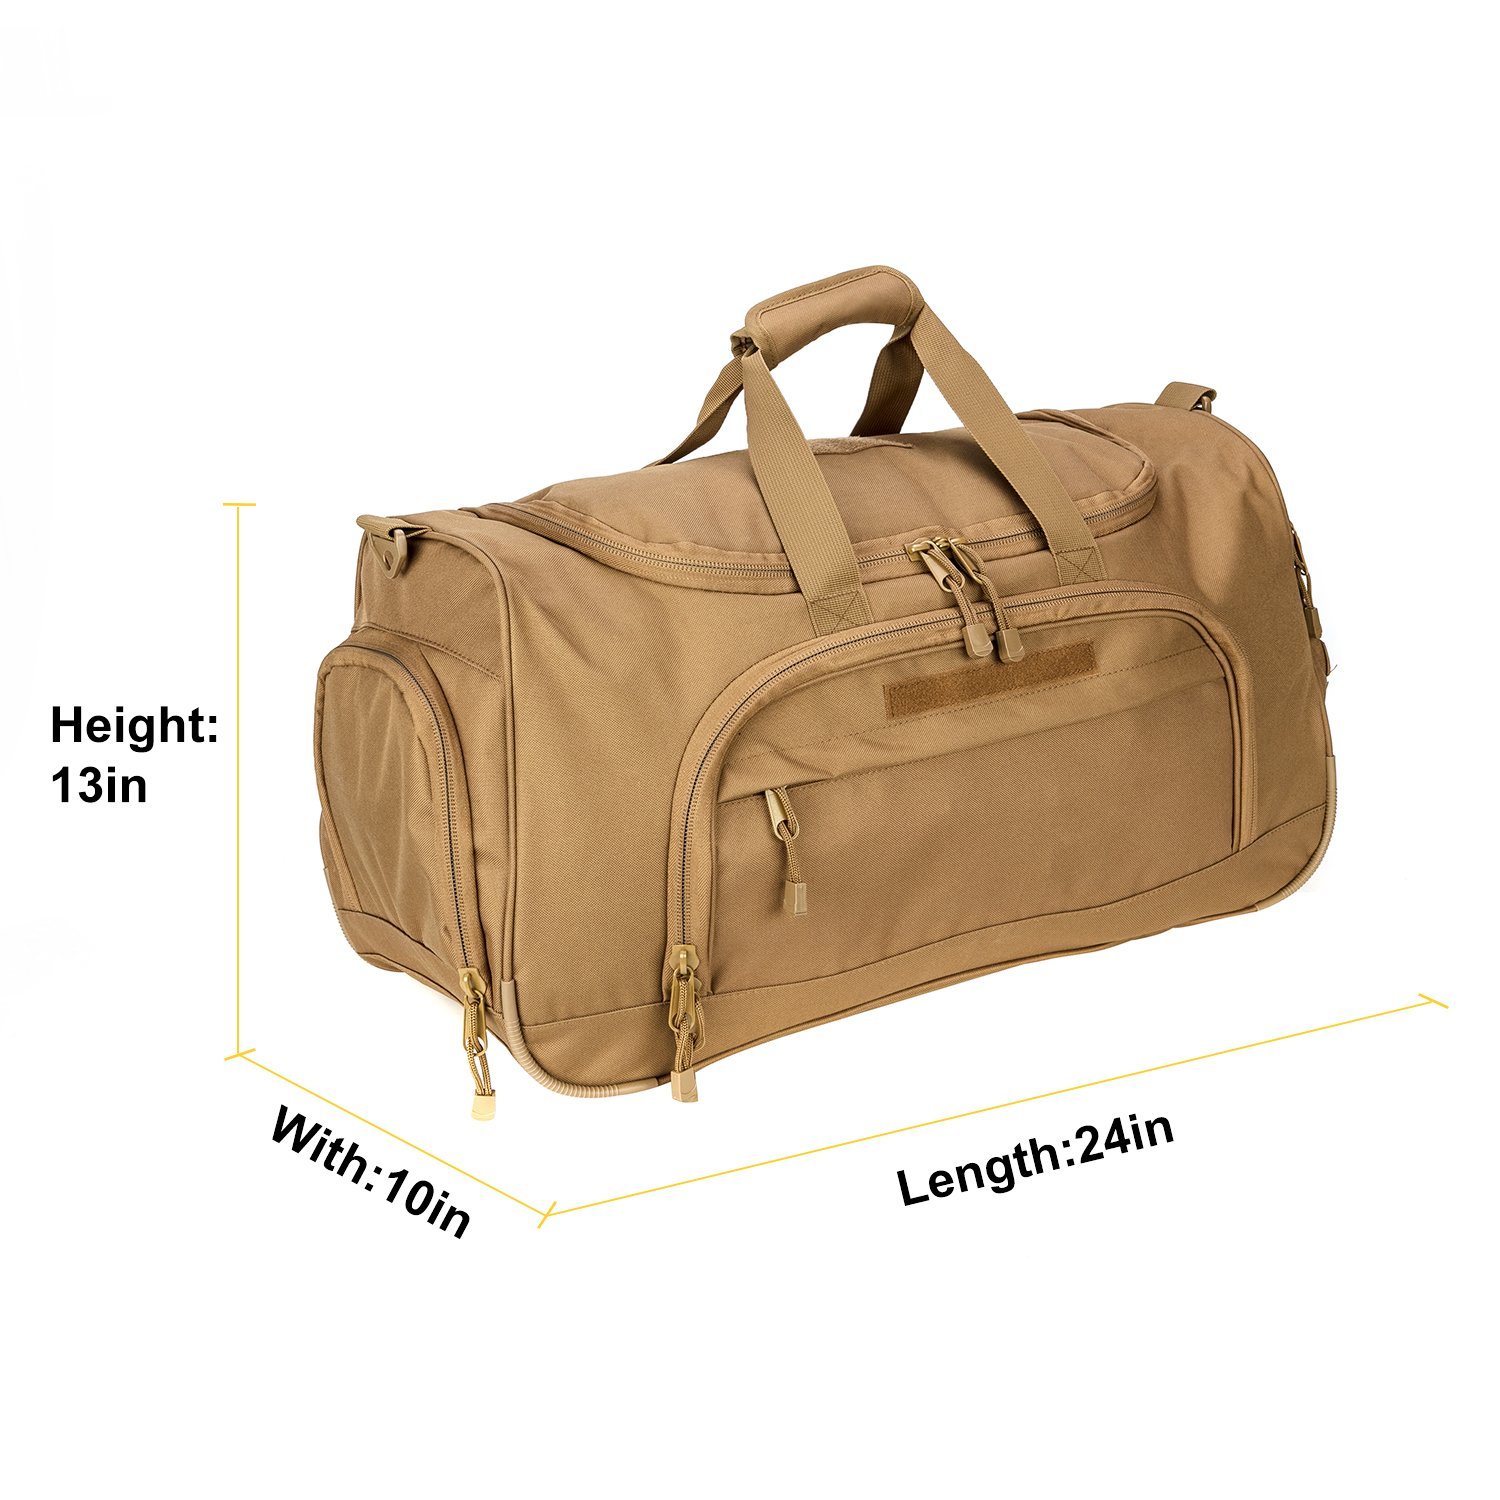 Fitness Optimal Compartments Large Capacity Bag with Shoe Compartment